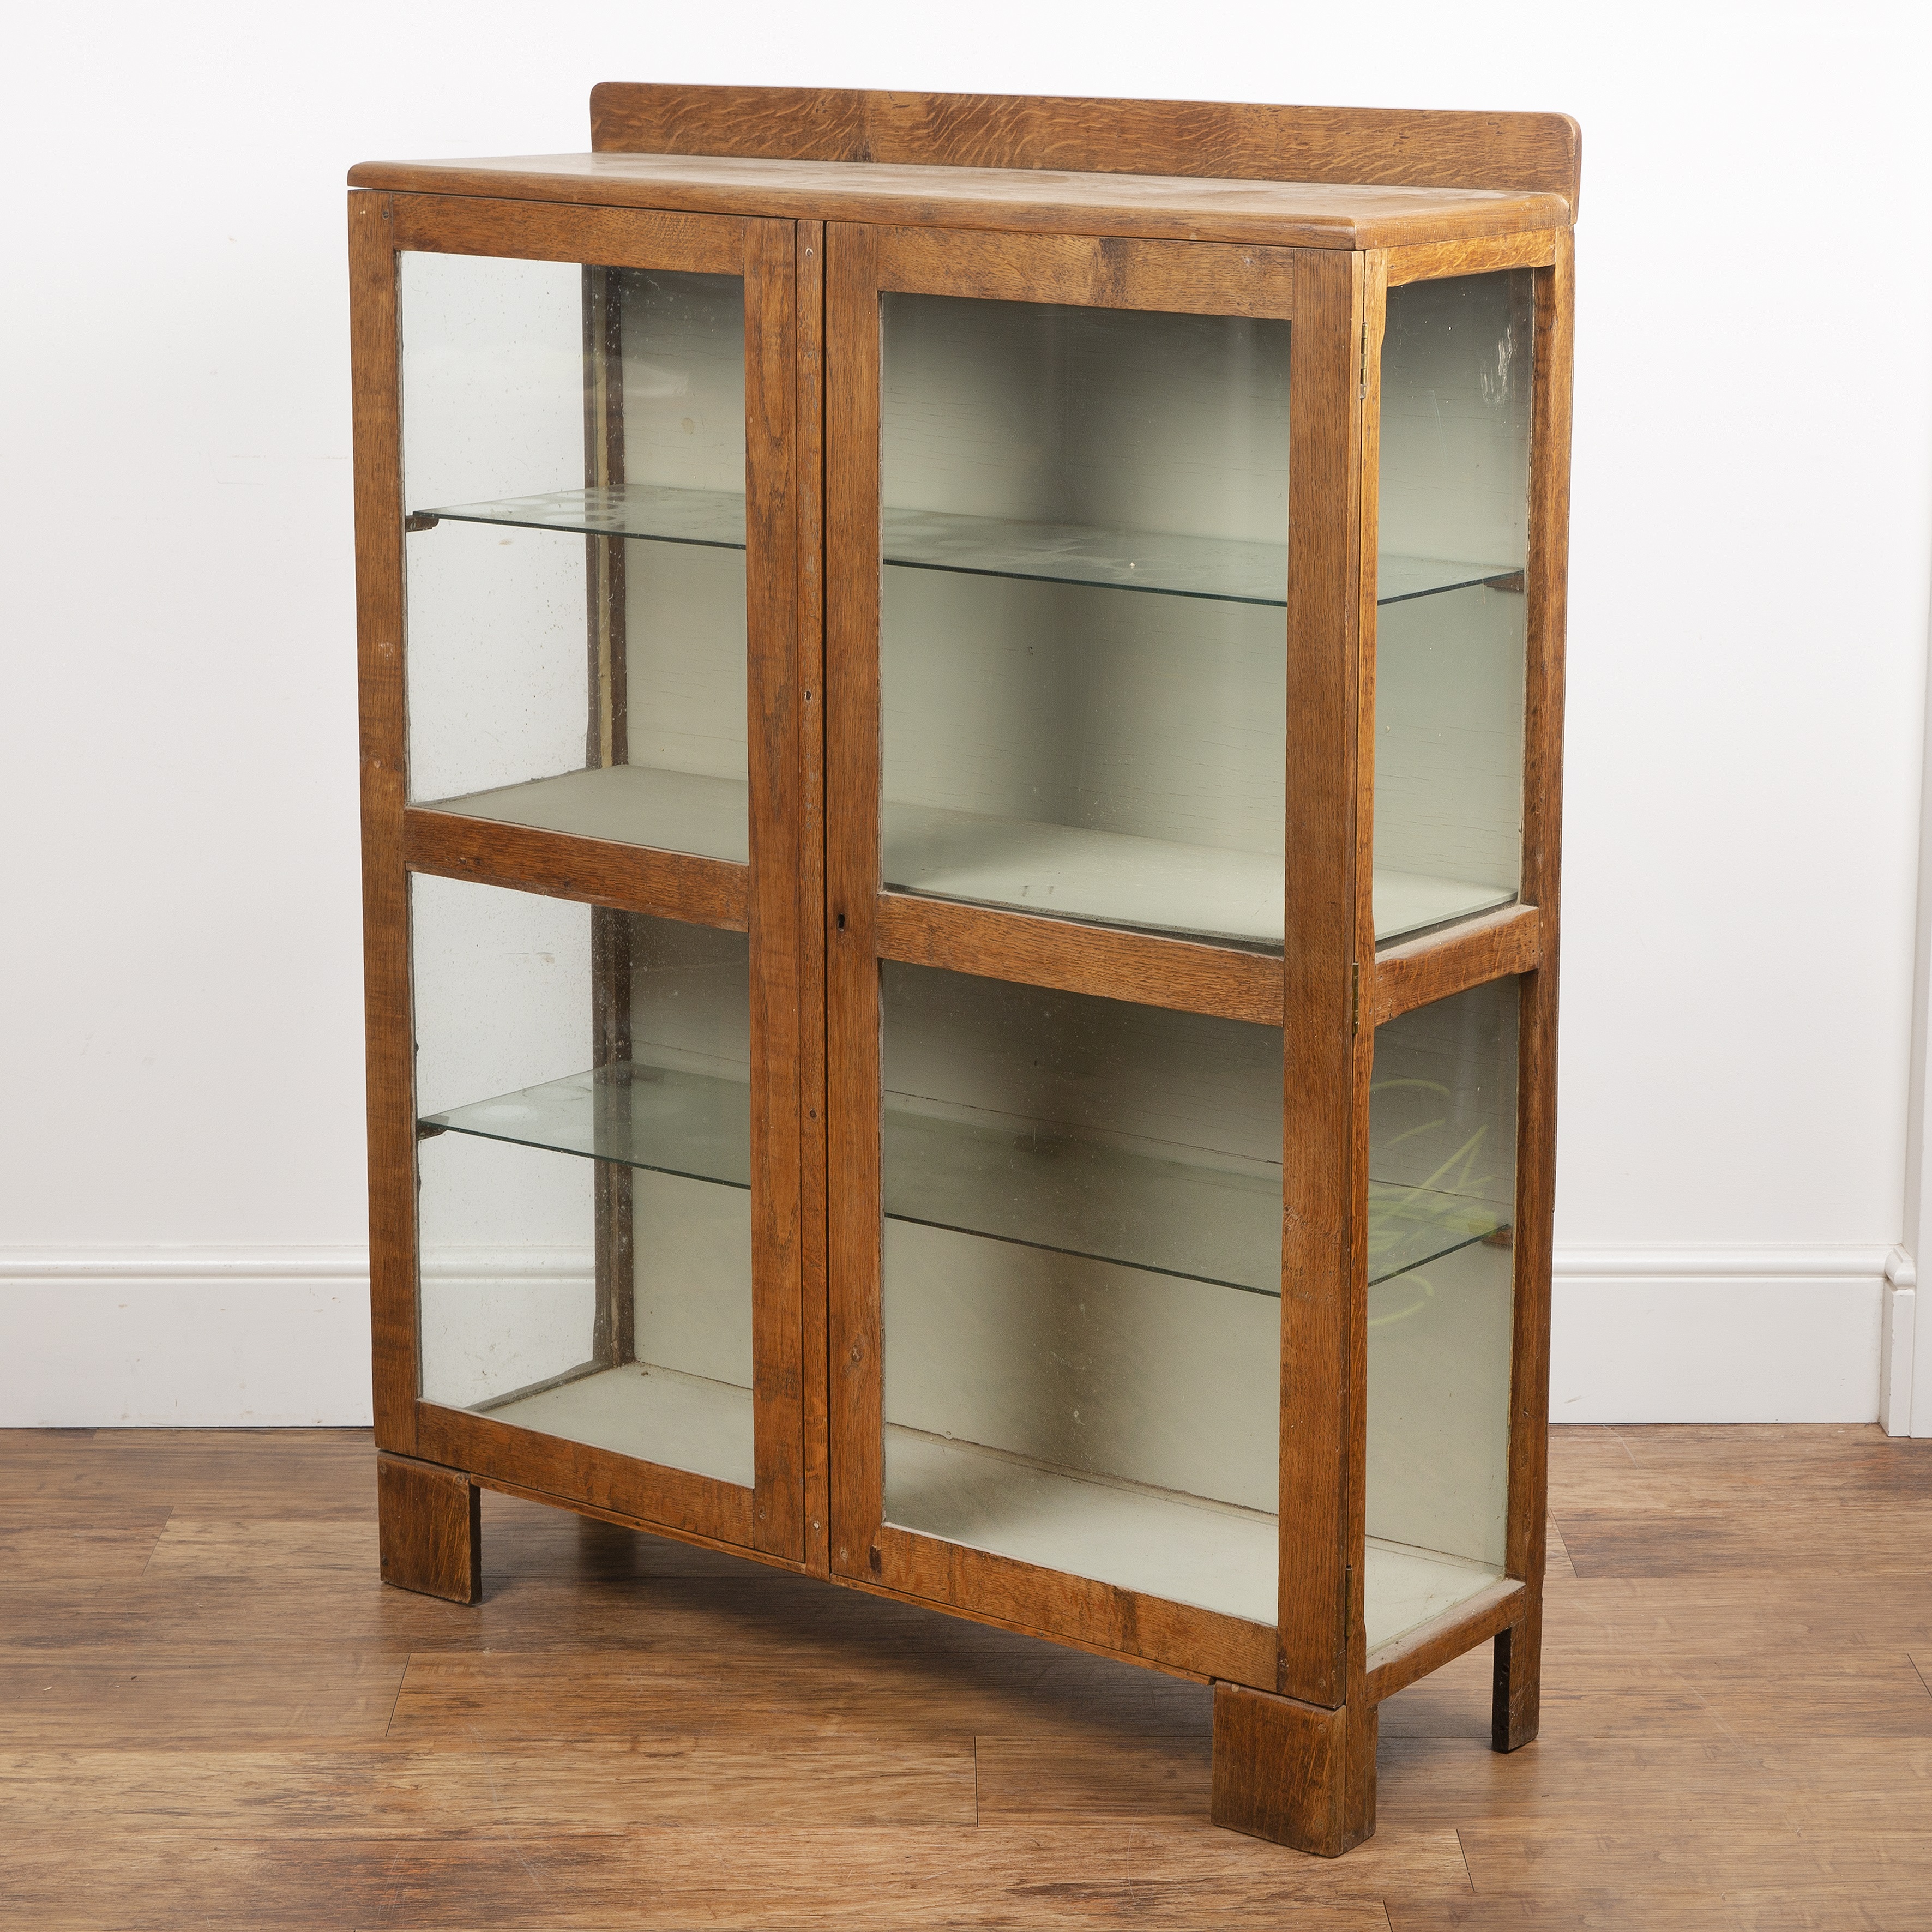 Cotswold School oak, glazed bookcase or cabinet, with galleried back above panelled doors, 95cm wide - Image 4 of 5